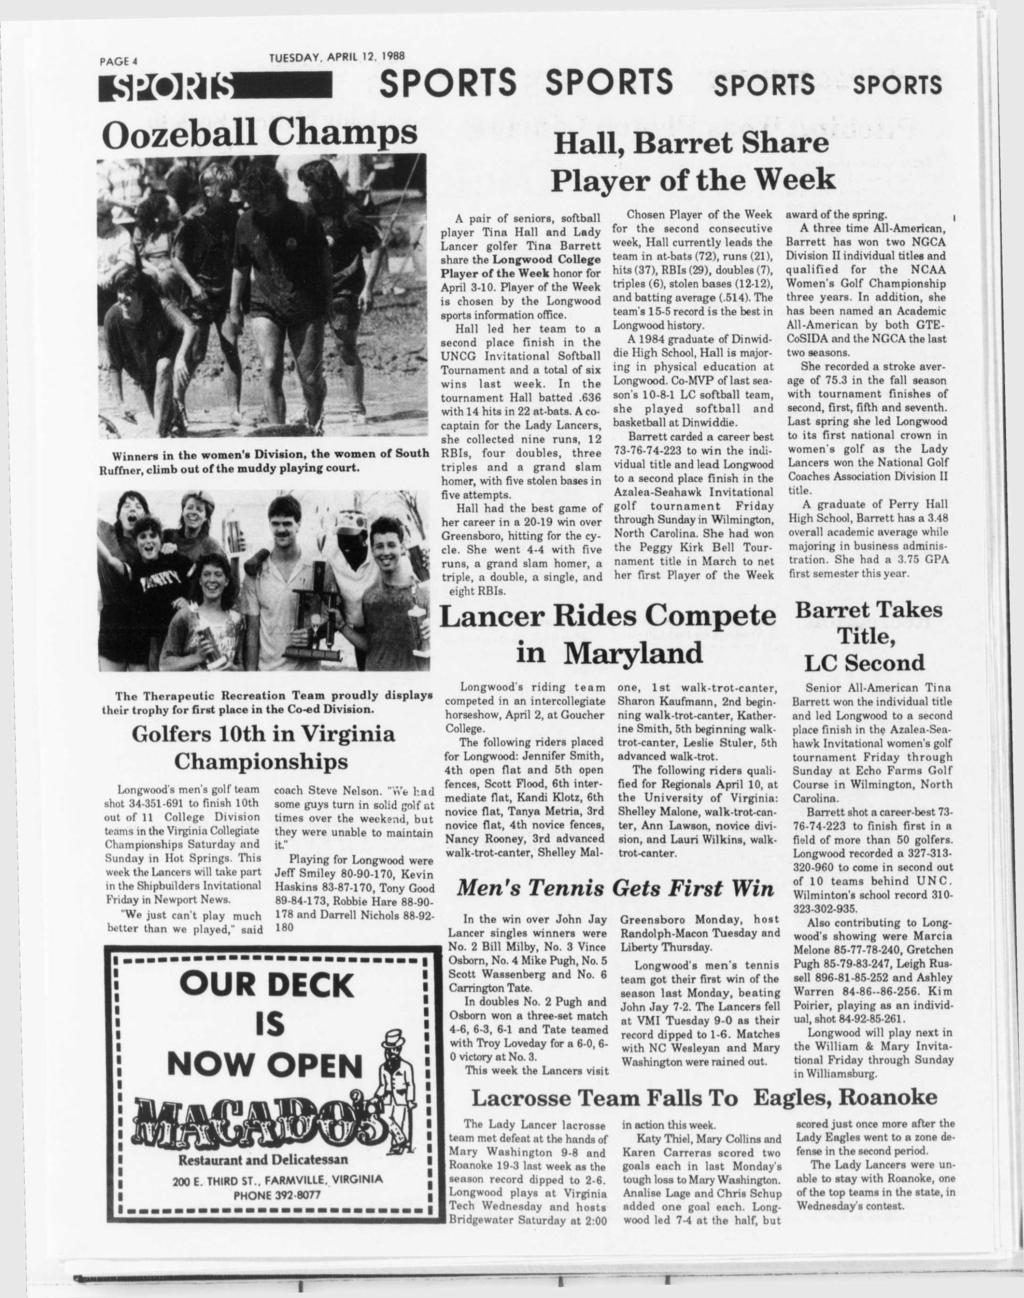 PAGE 4 TUESDAY. APRL 12, 1988 HsMrlfc SPORTS SPORTS SPORTS SPORTS Oozeball Champs Wnners n the women's Dvson, the women of South Ruffner, clmb out of the muddy playng court.